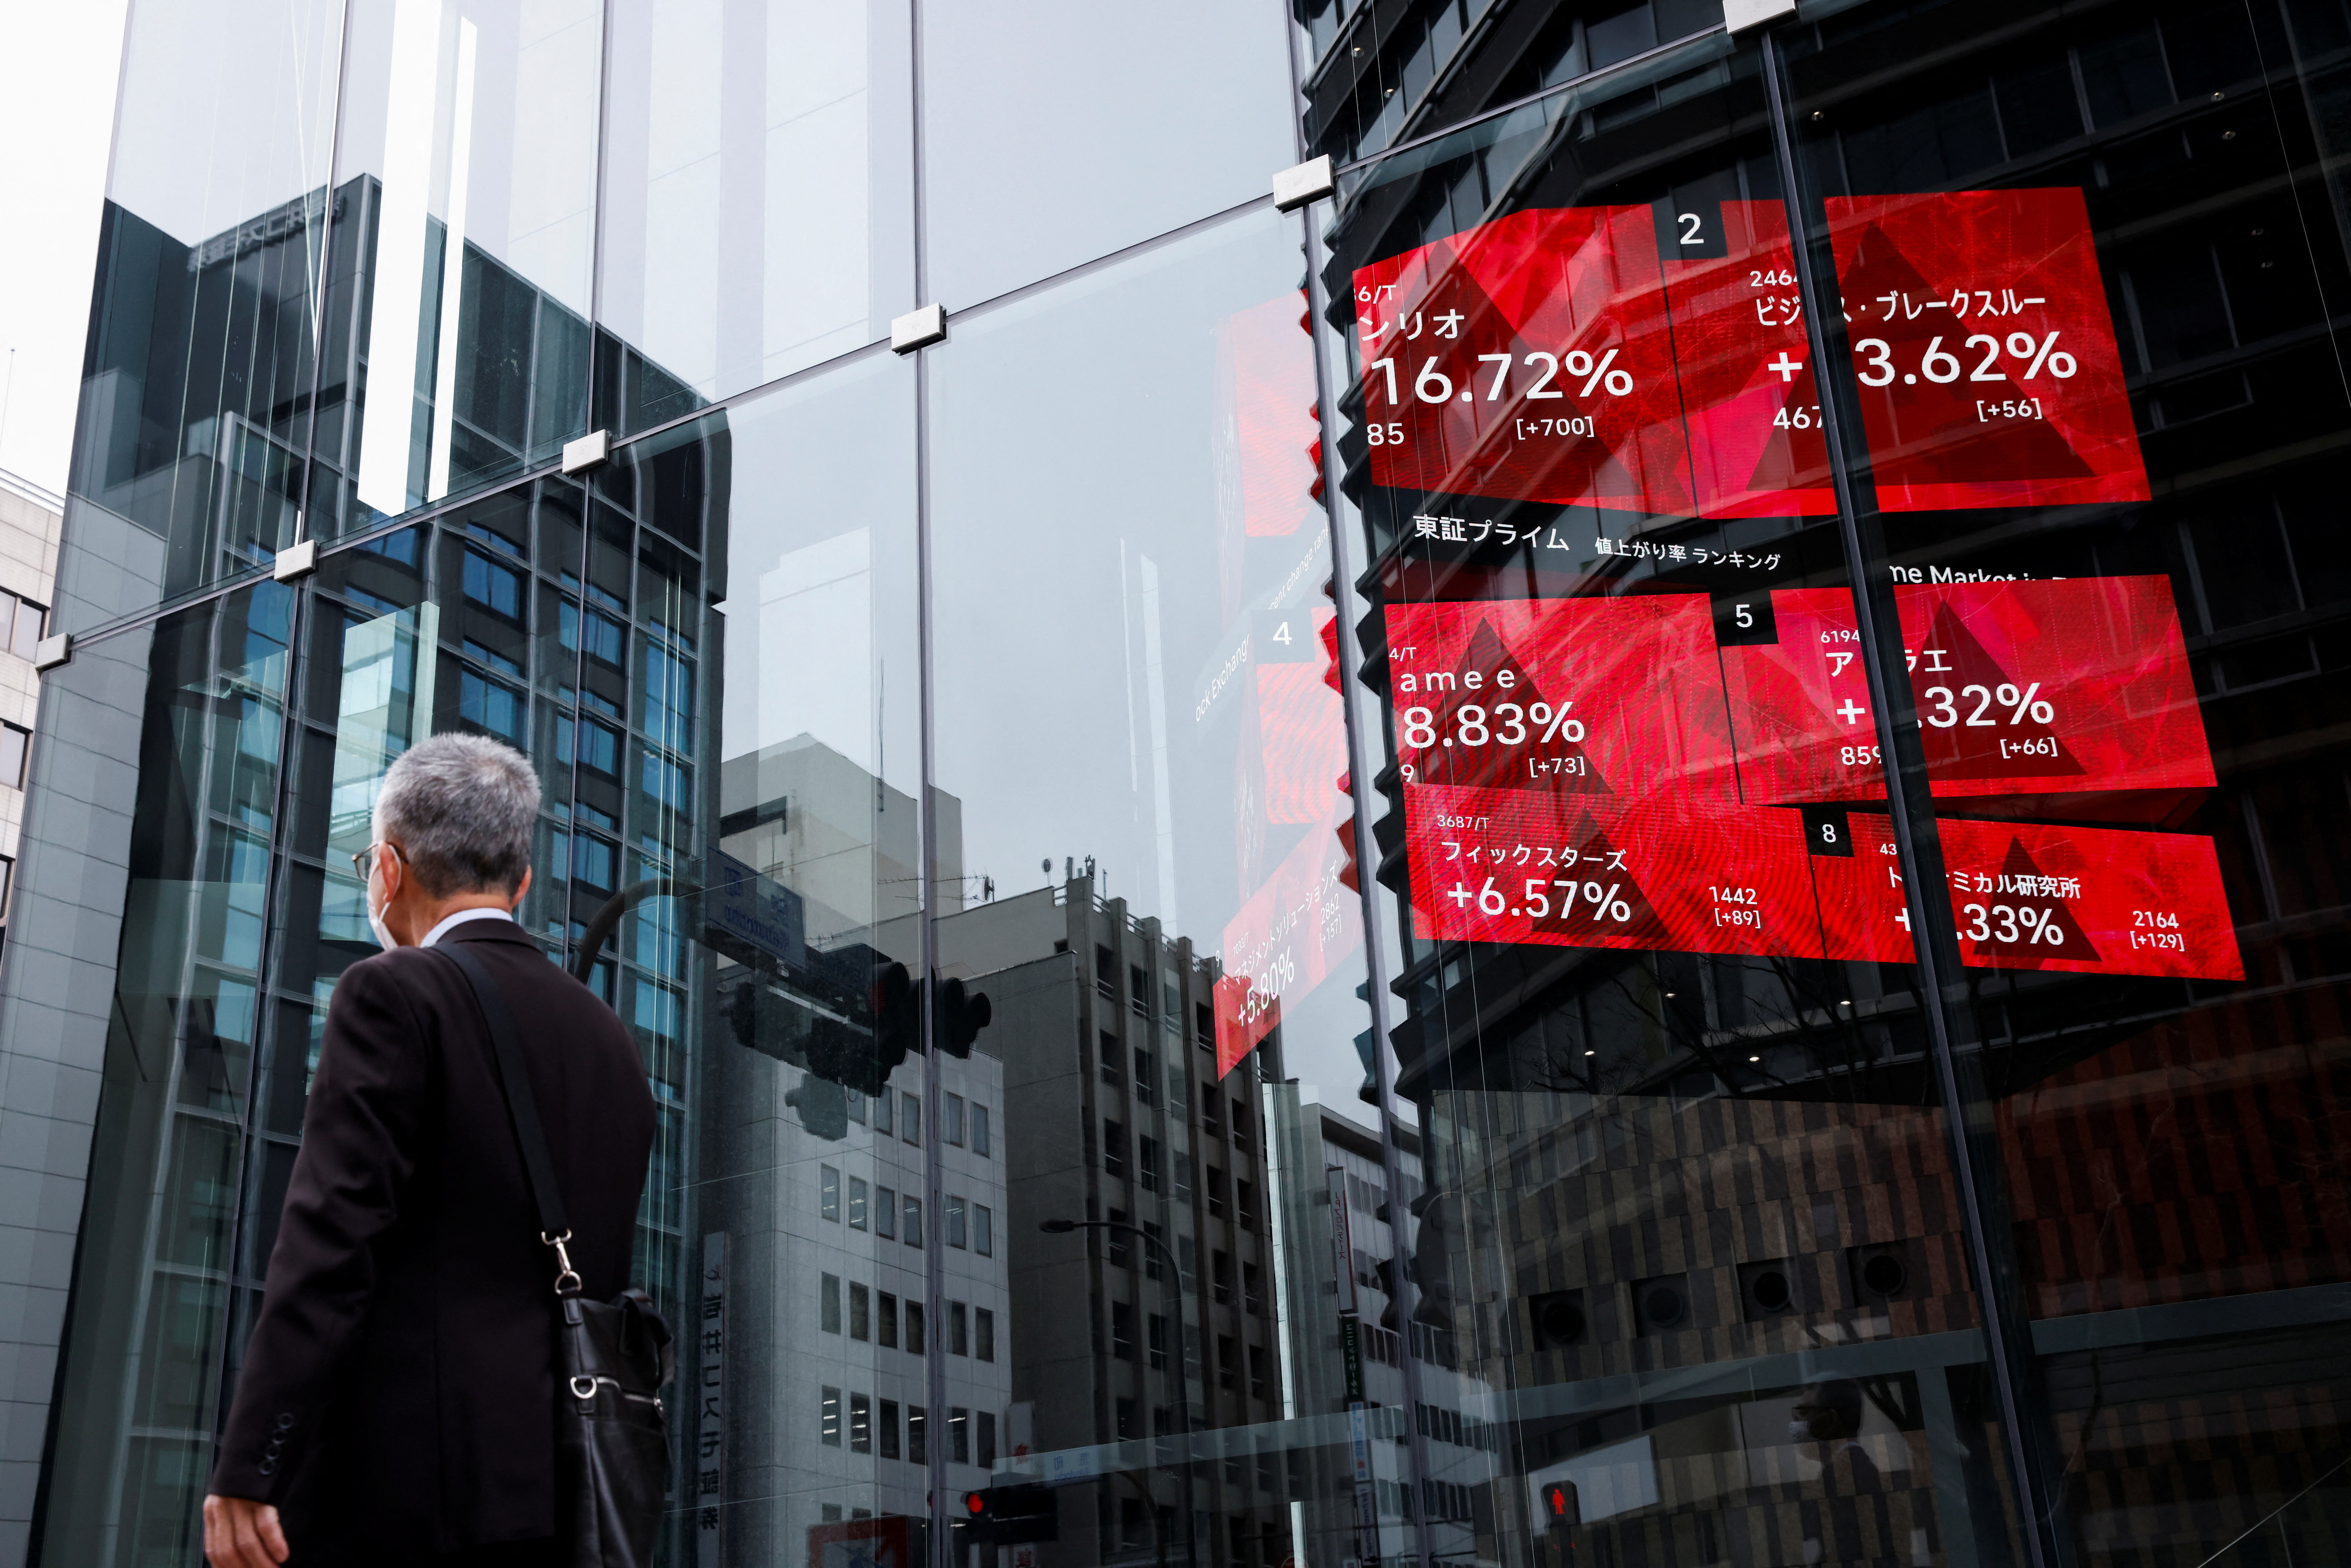 A man walks past an electronic board showing stock visualizations outside a brokerage, in Tokyo